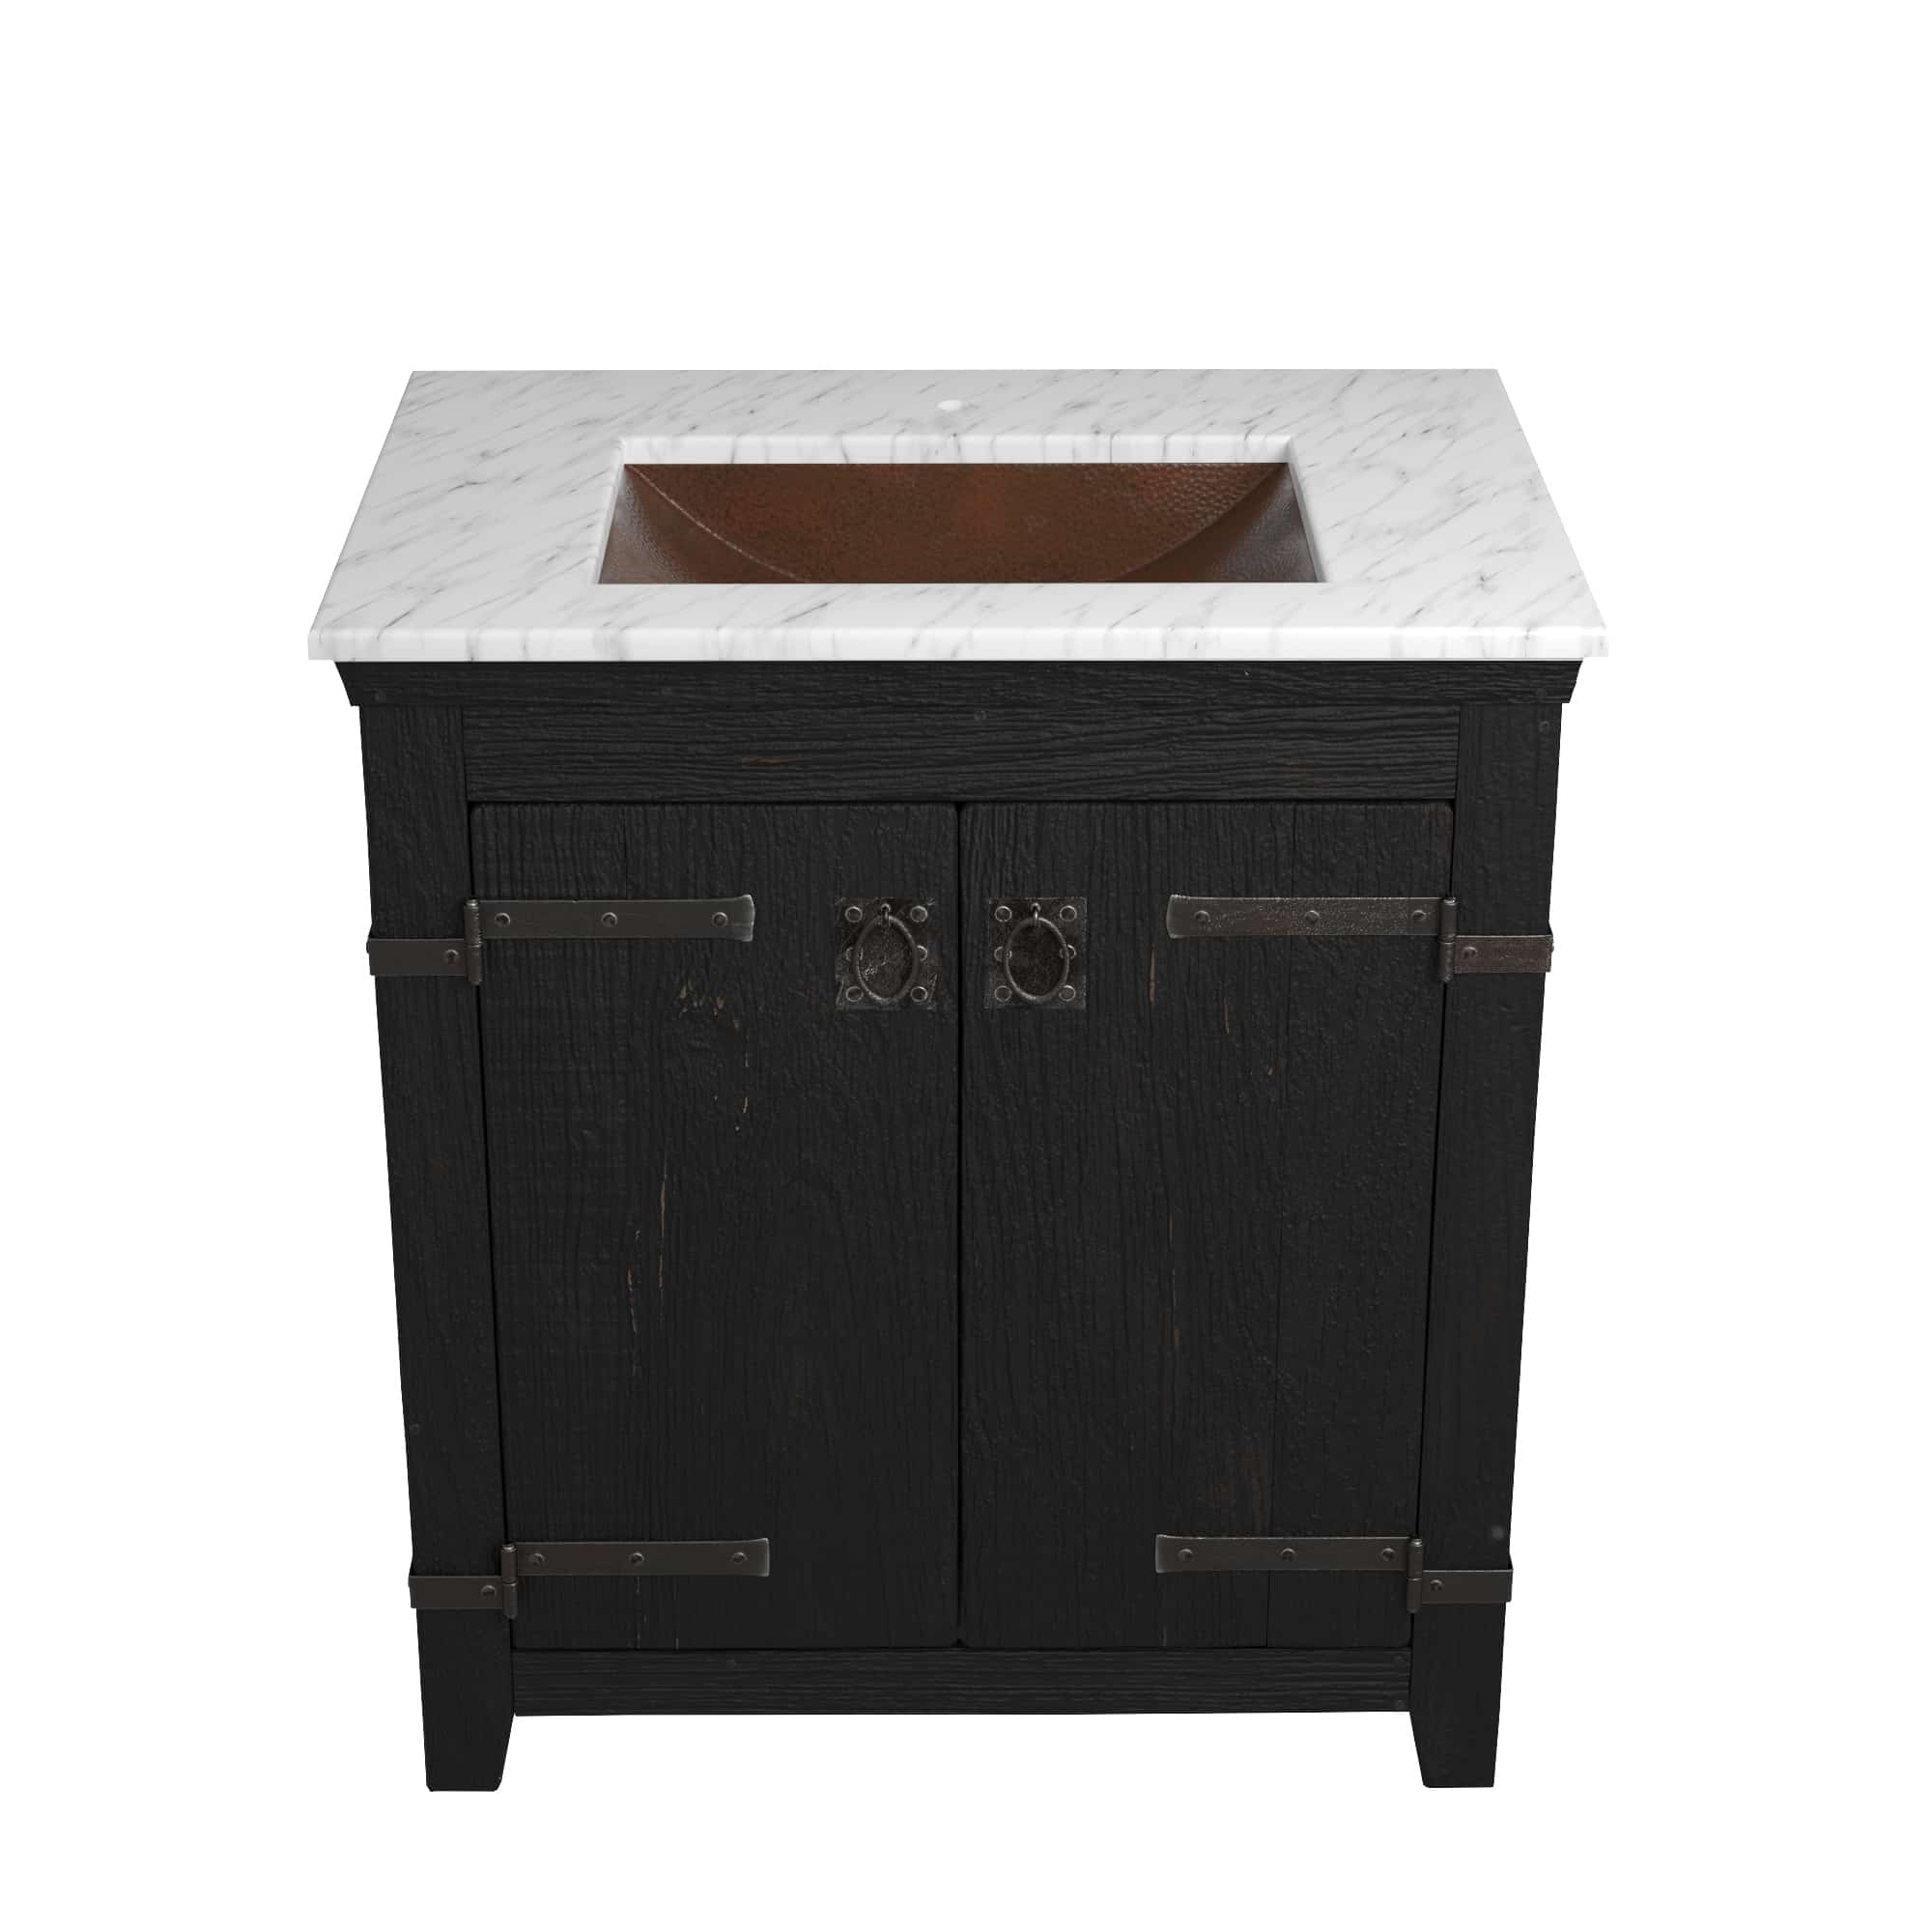 Native Trails 30" Americana Vanity in Anvil with Carrara Marble Top and Avila in Antique, Single Faucet Hole, BND30-VB-CT-CP-005